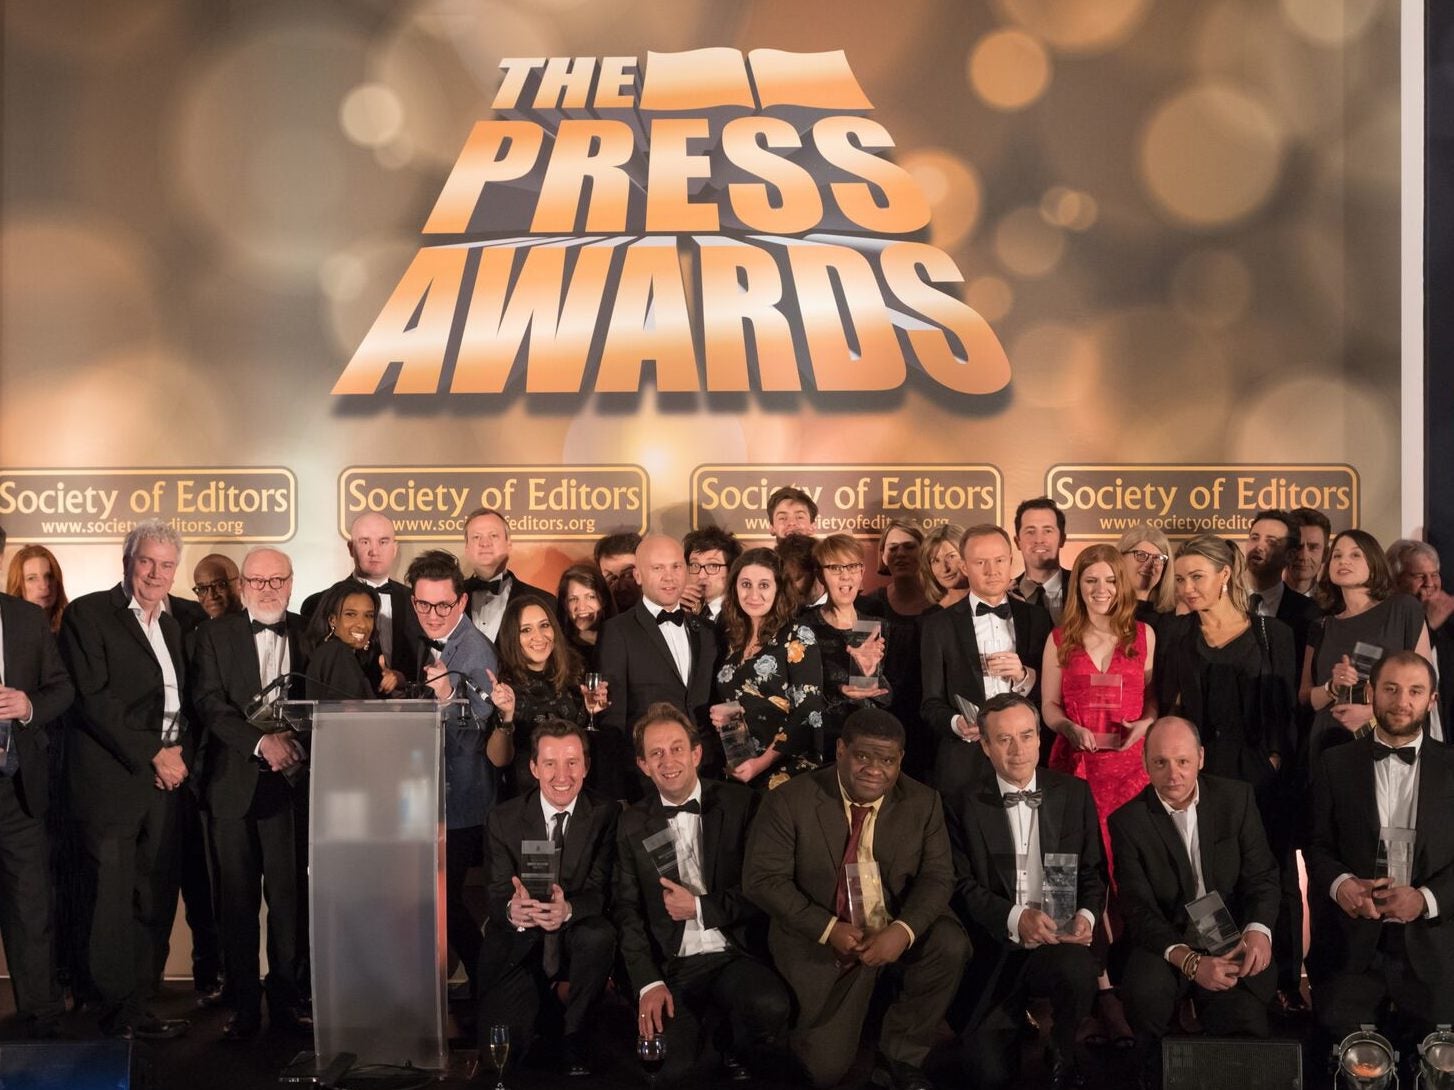 Financial Times, Buzzfeed and The Guardian among big winners at Society of Editors Press Awards 2018